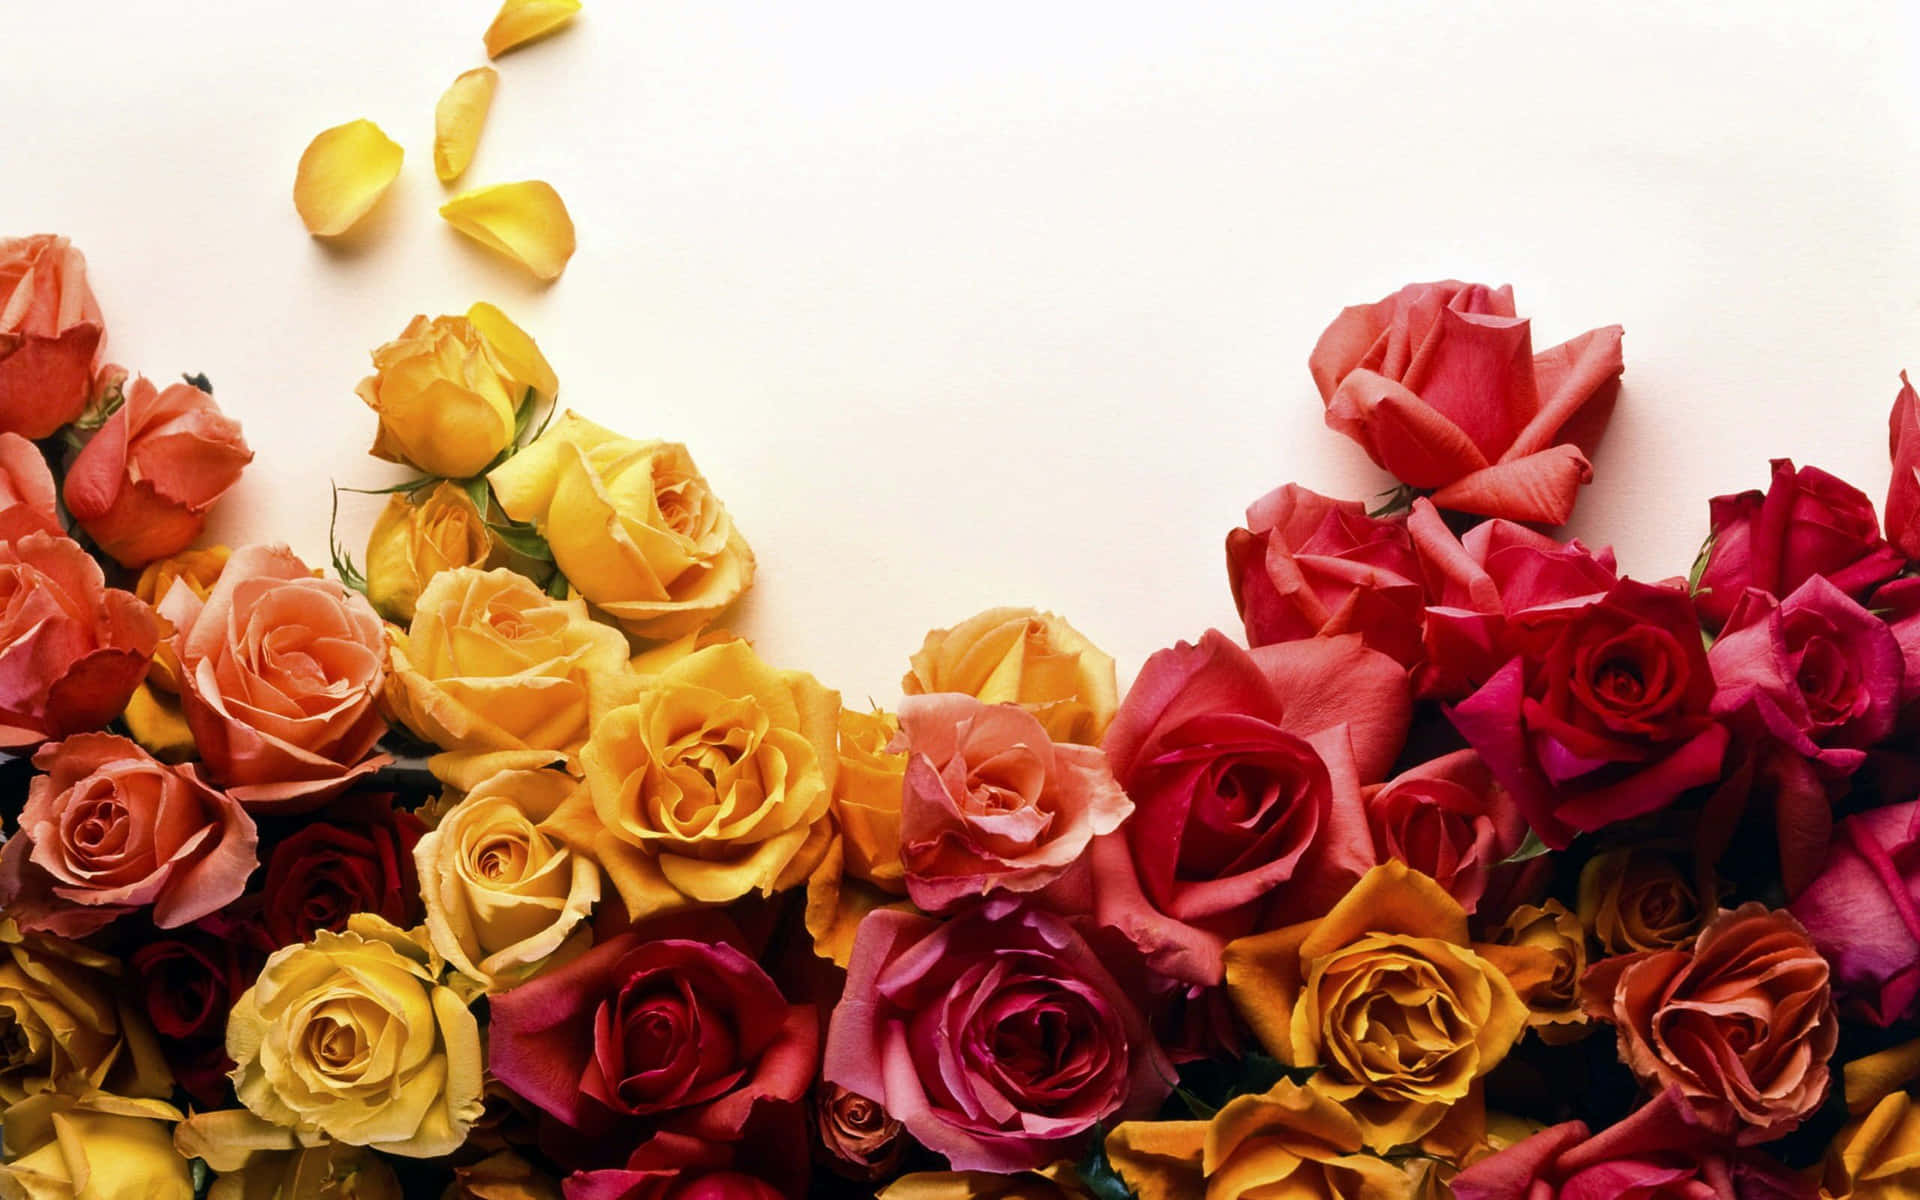 Aesthetic And Best Roses Background Design